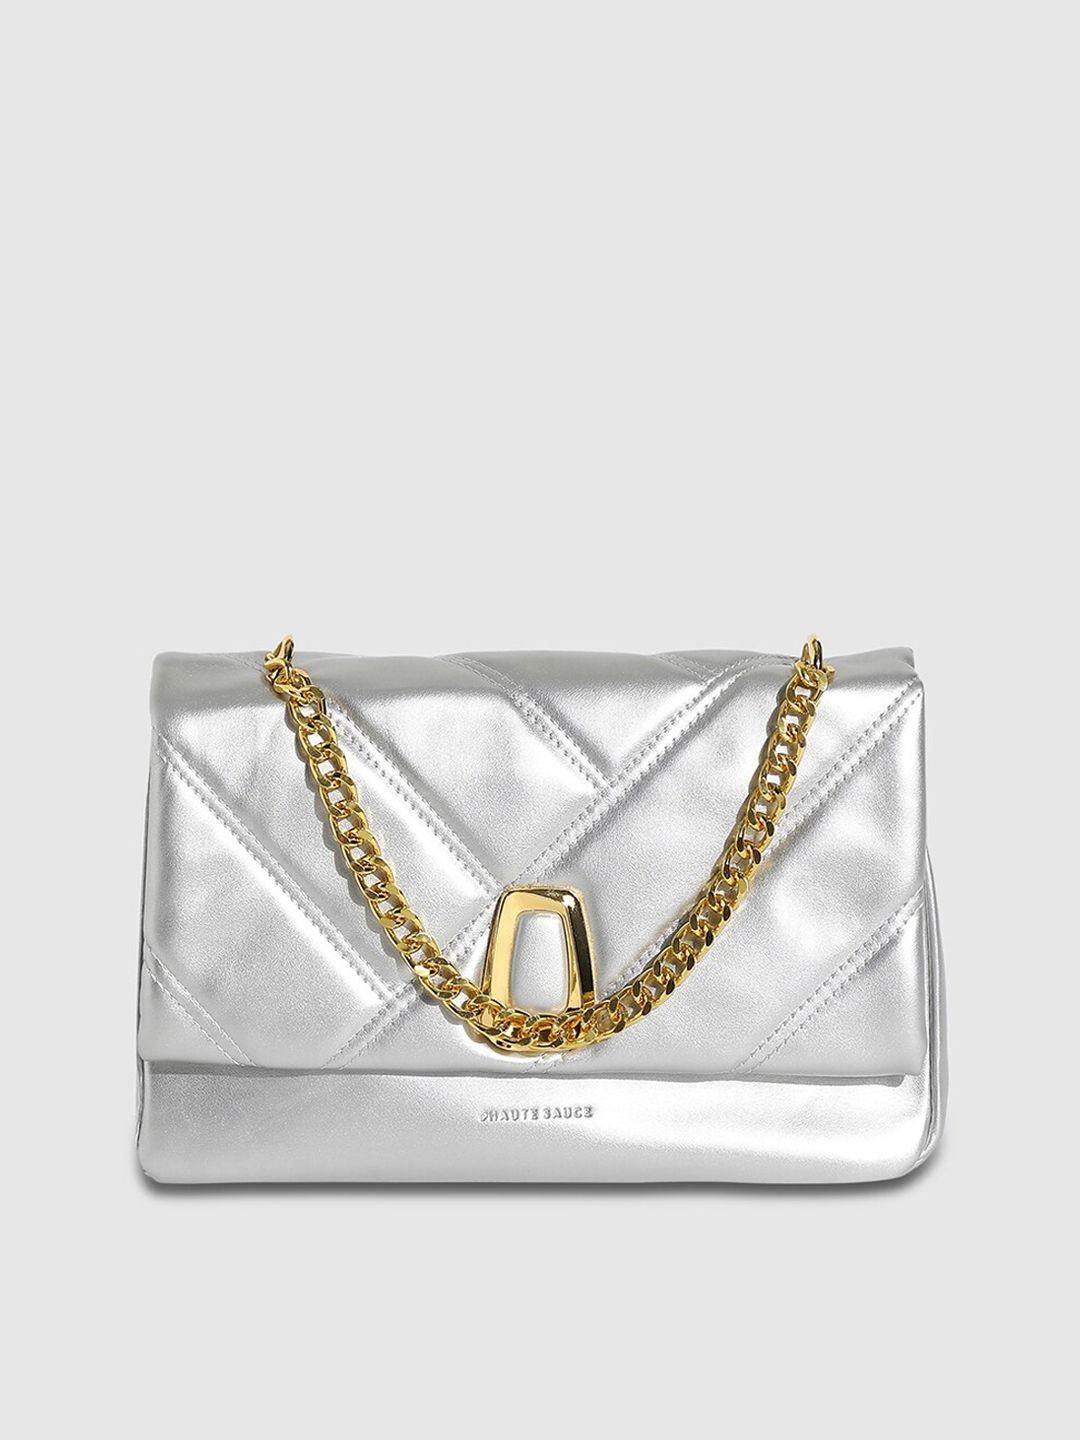 haute sauce by campus sutra silver-toned textured structured sling bag